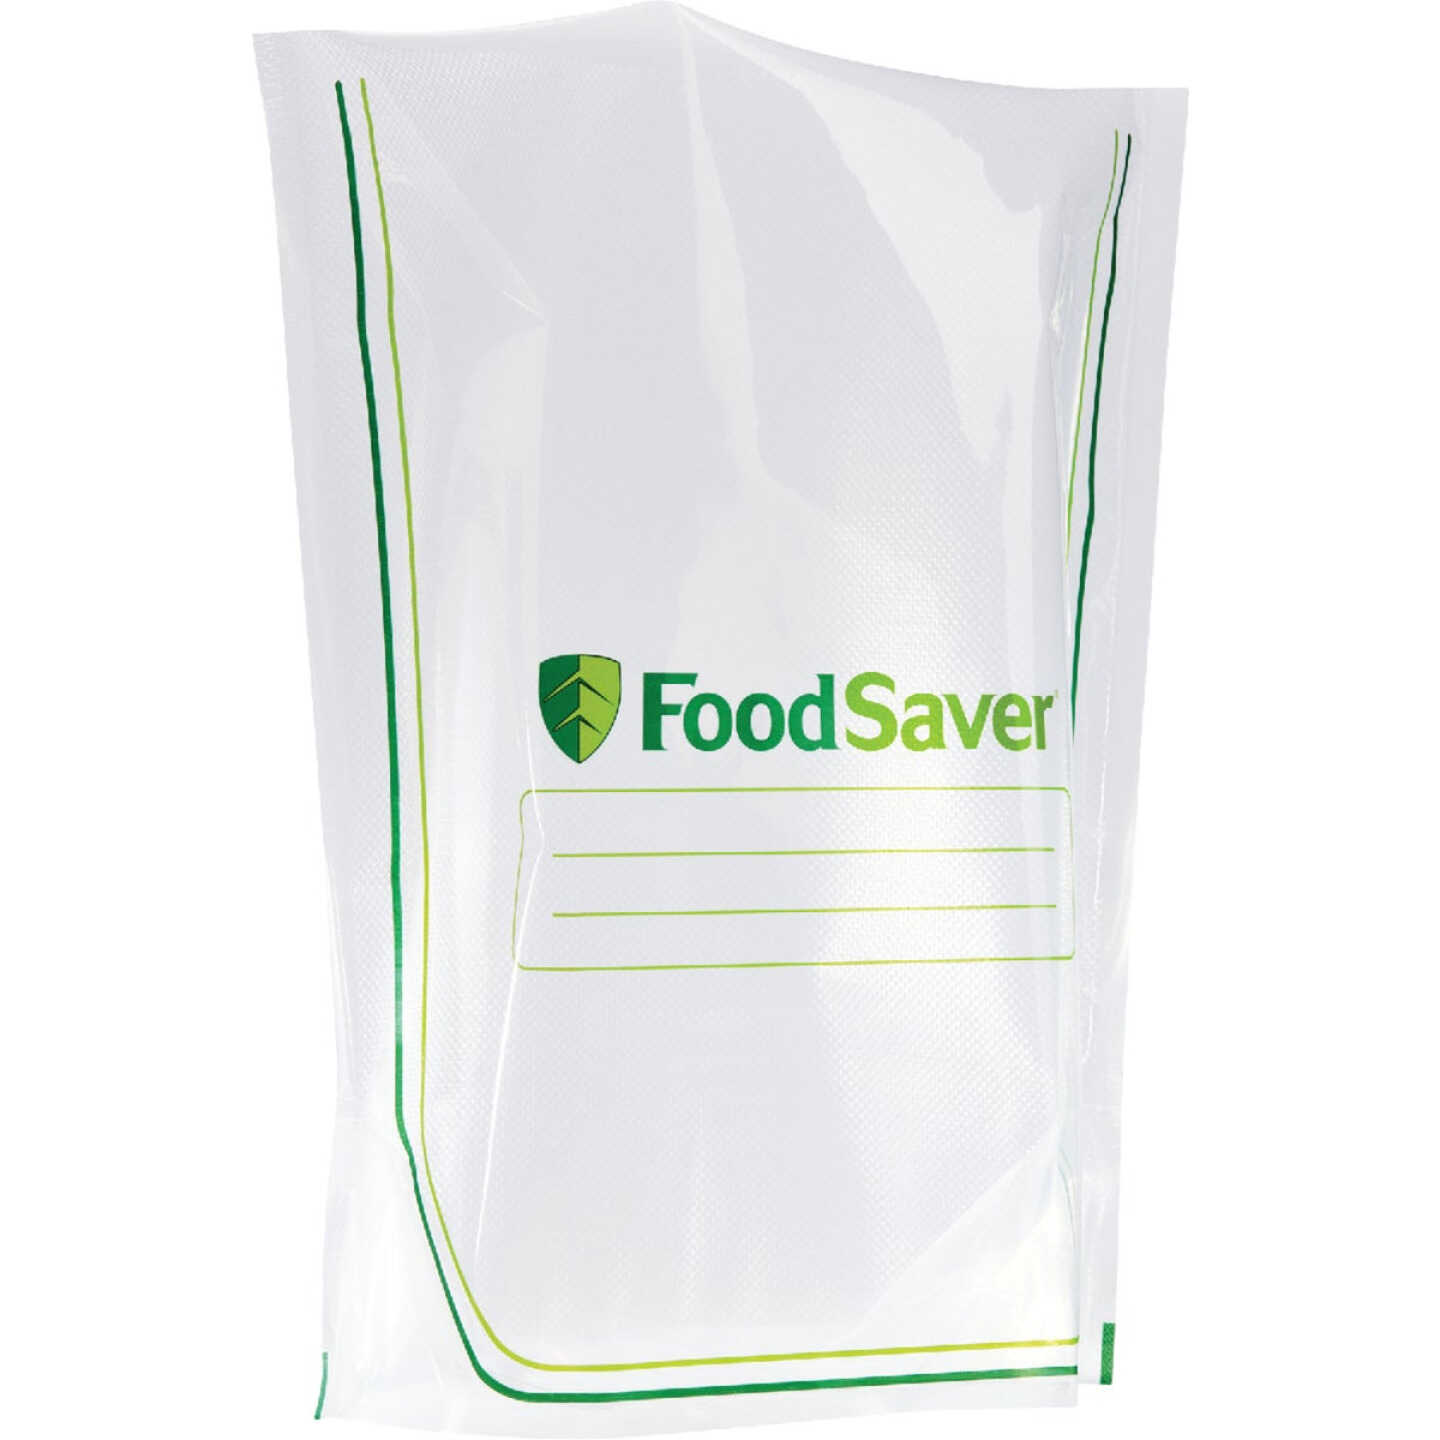 FoodSaver Easy Fill 1-Gallon Vacuum Sealer Bags | Commercial Grade and  Reusable | 10 Count, 1 GALLON, Clear